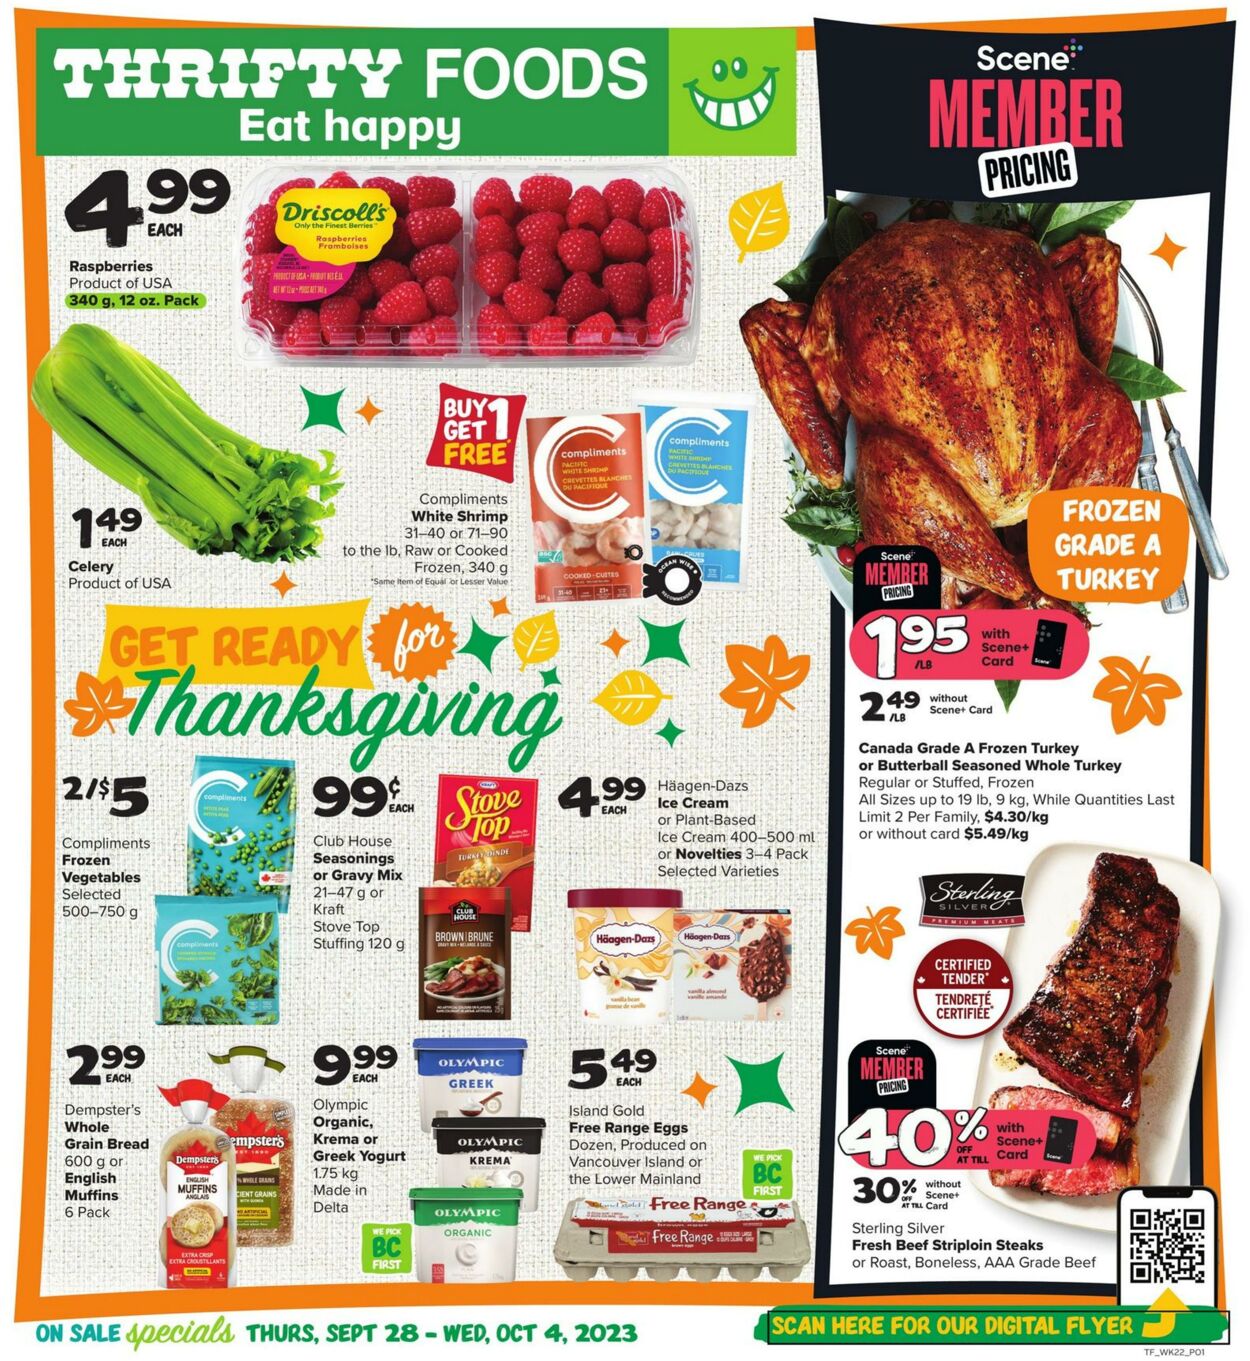 Thrifty Foods Promotional flyers